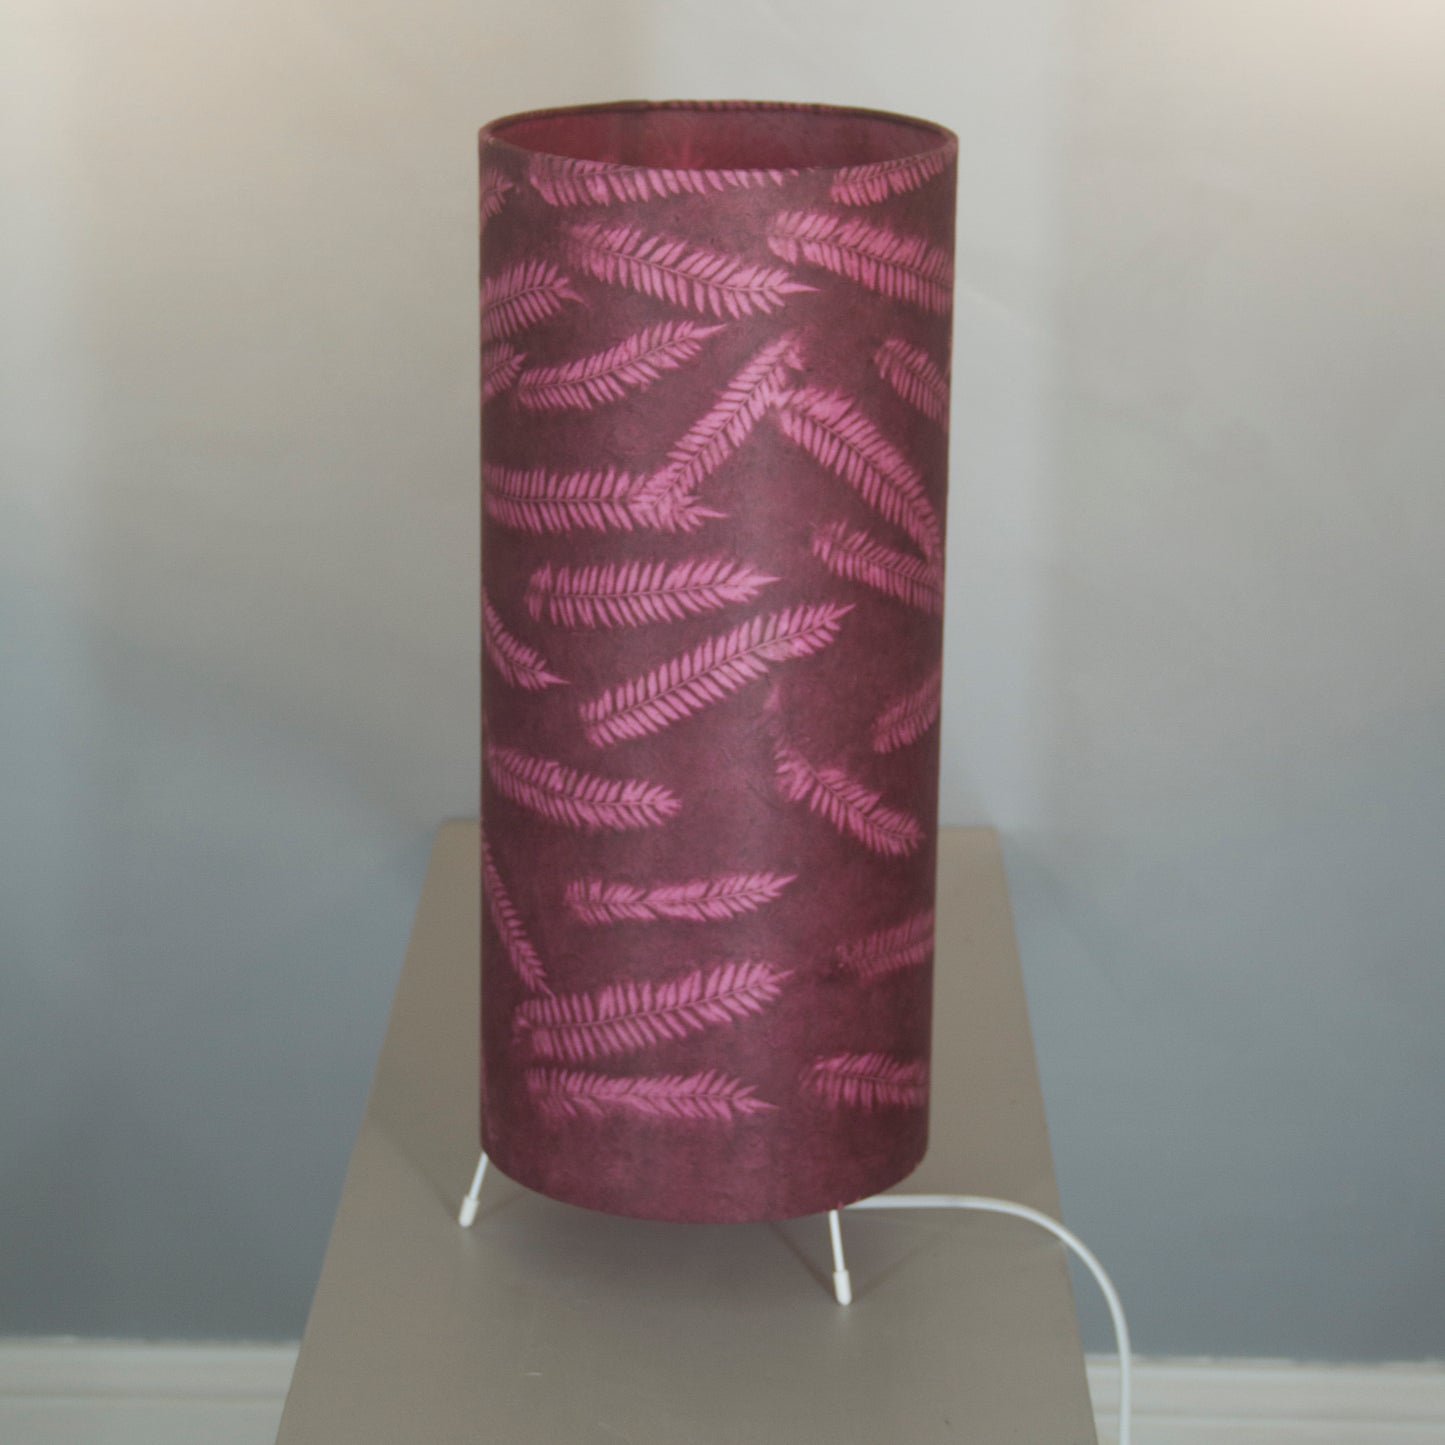 Drum Lamp Shade - P25 - Resistance Dyed Pink Fern, 60cm(d) x 30cm(h)